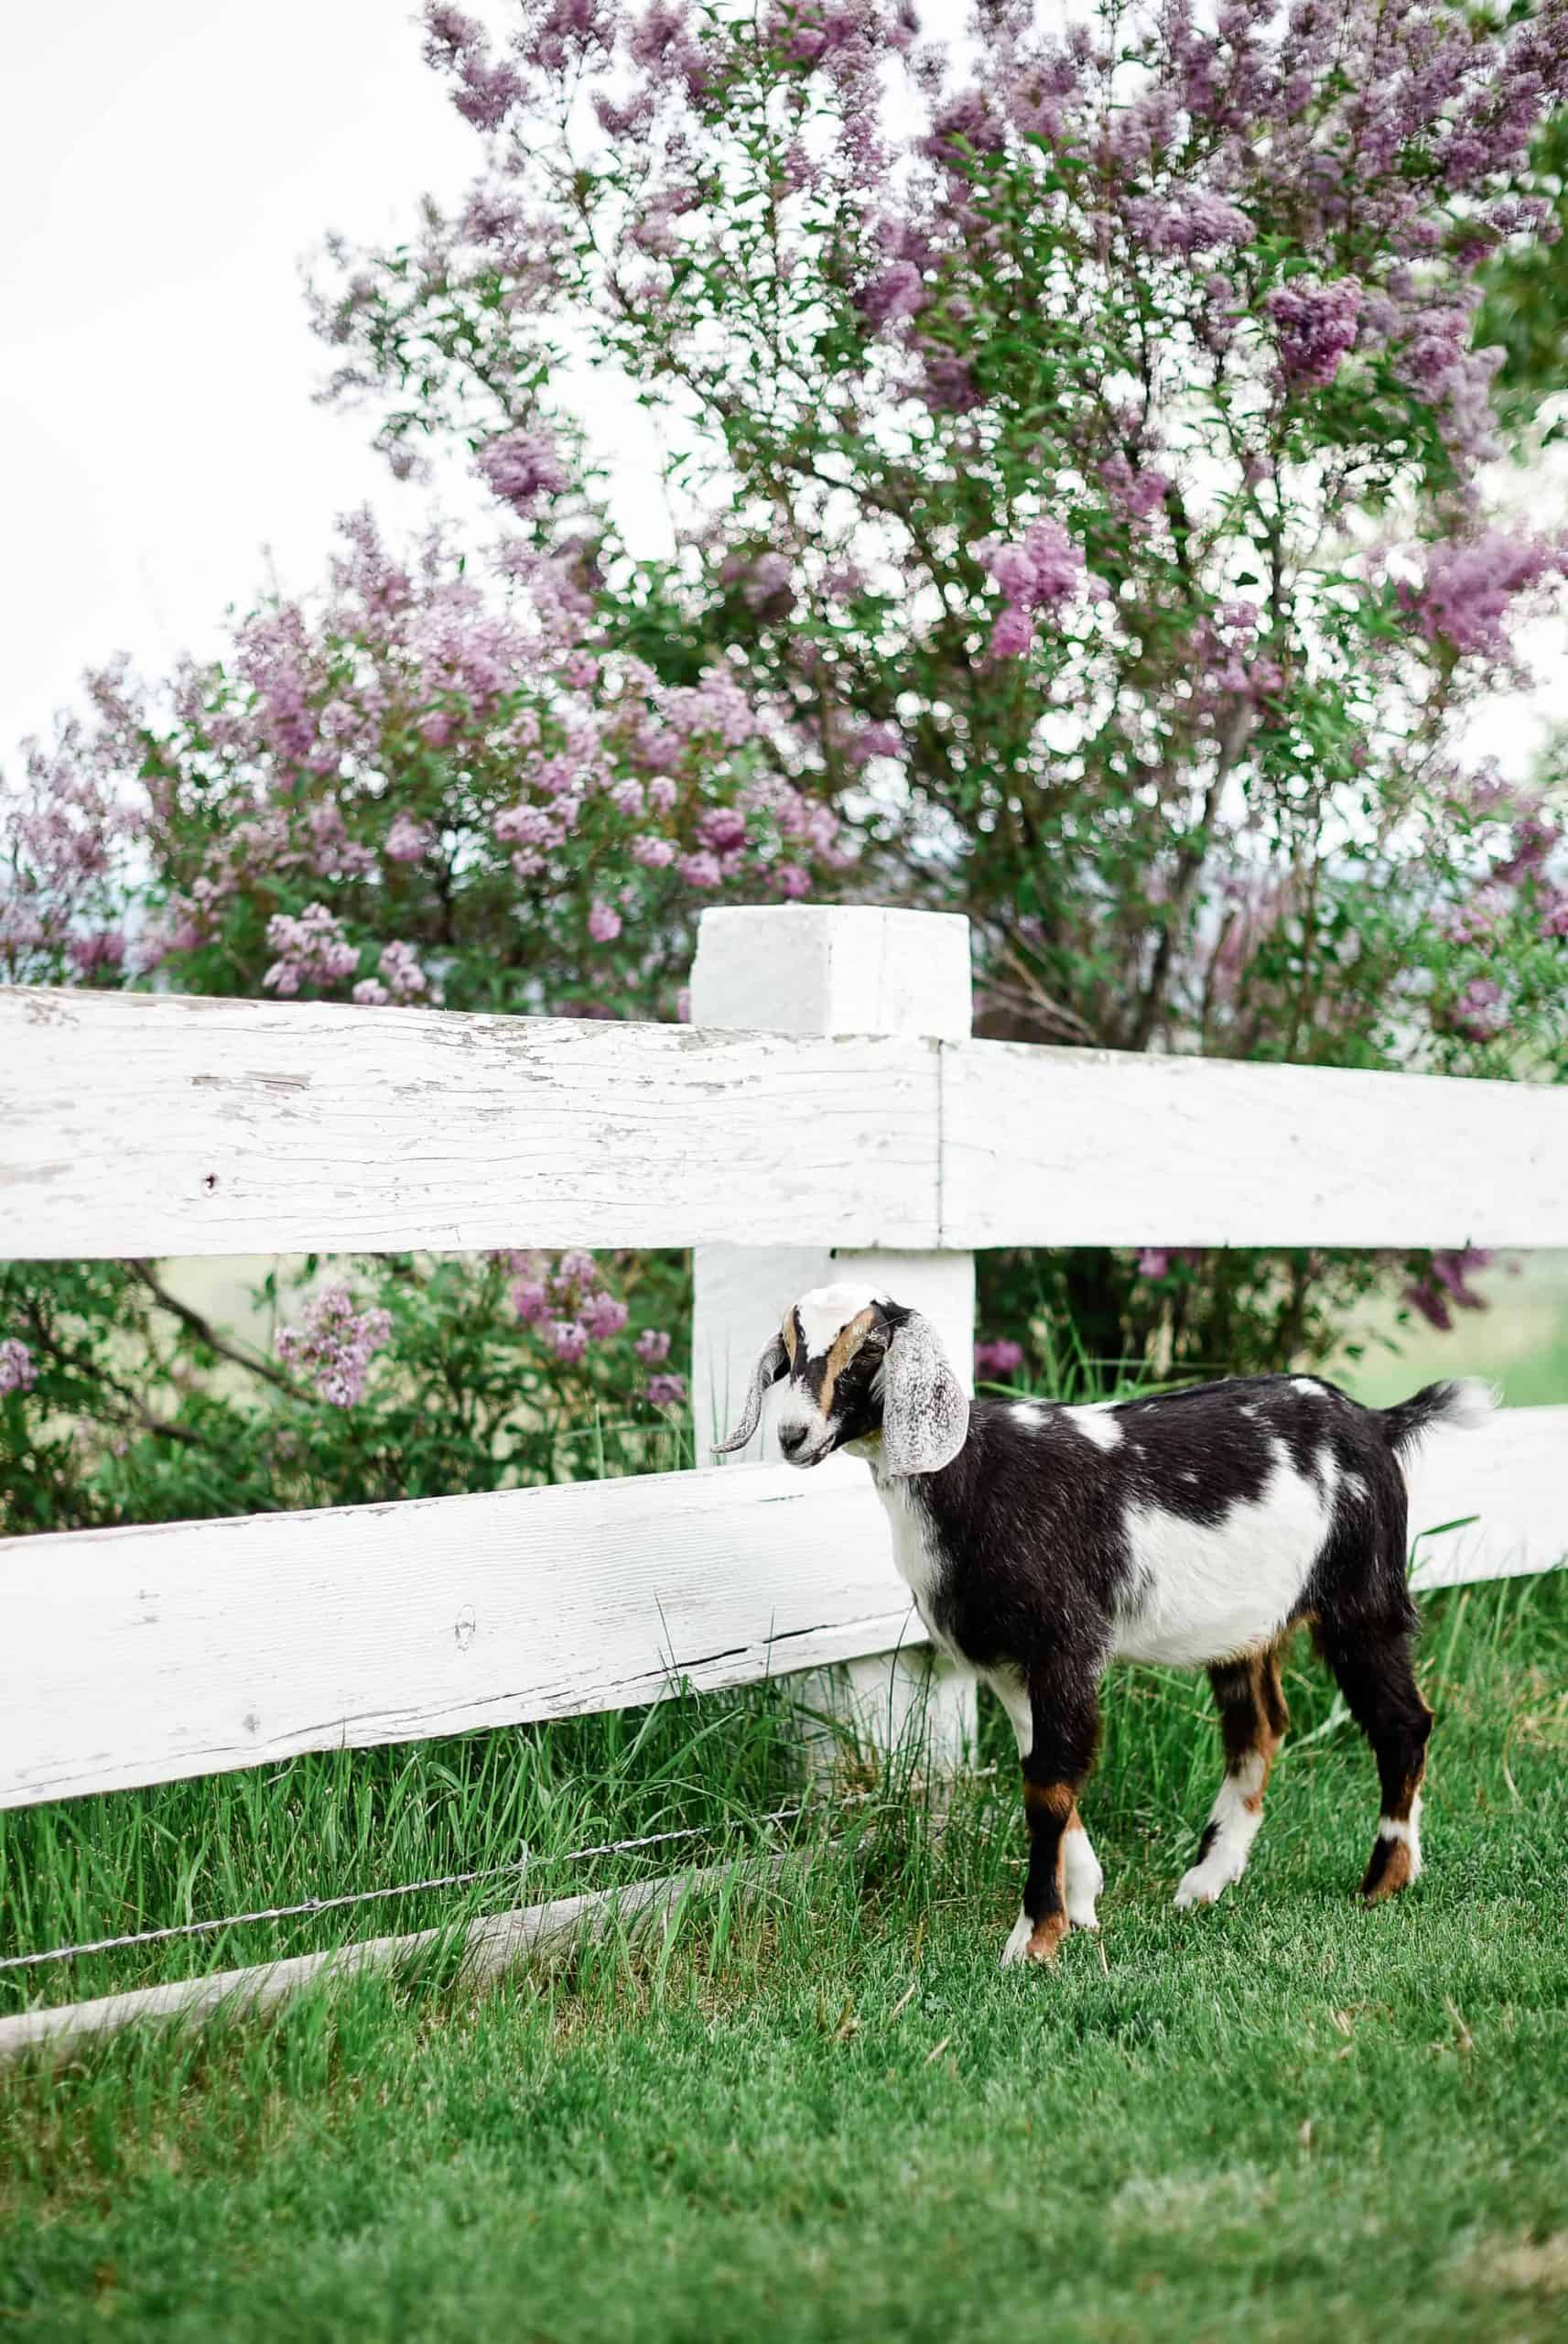 One of the many questions I receive about raising goats and keeping goats as pets is: How do you keep the goat barn clean? Today I am going to share how I keep our goat barn clean and how we keep our pet goats healthy! 